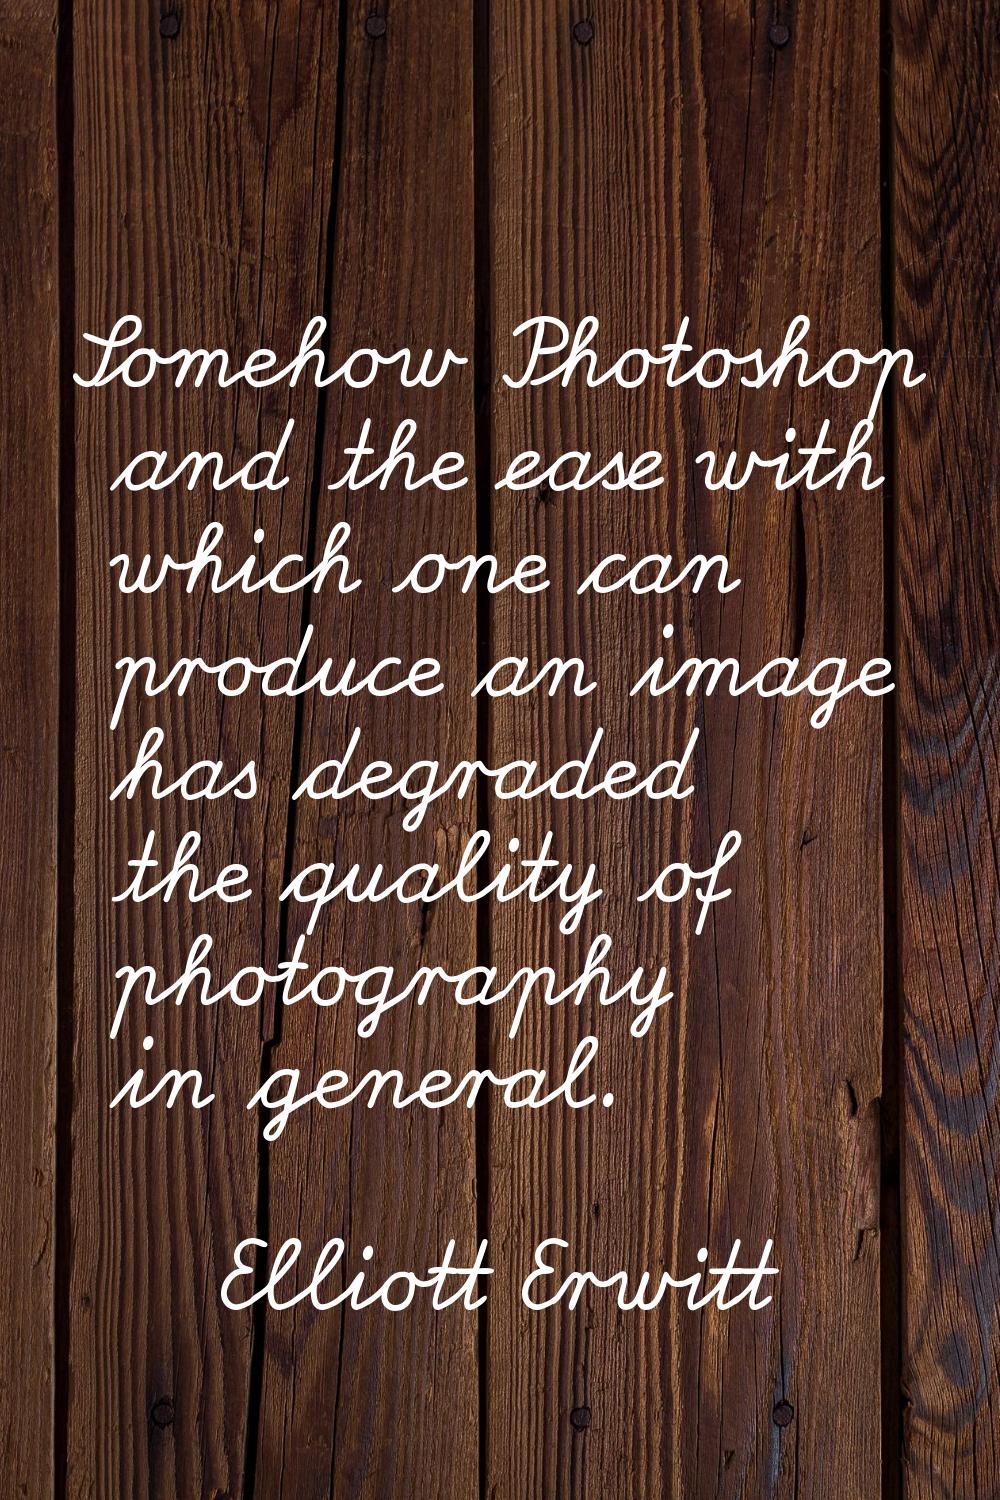 Somehow Photoshop and the ease with which one can produce an image has degraded the quality of phot